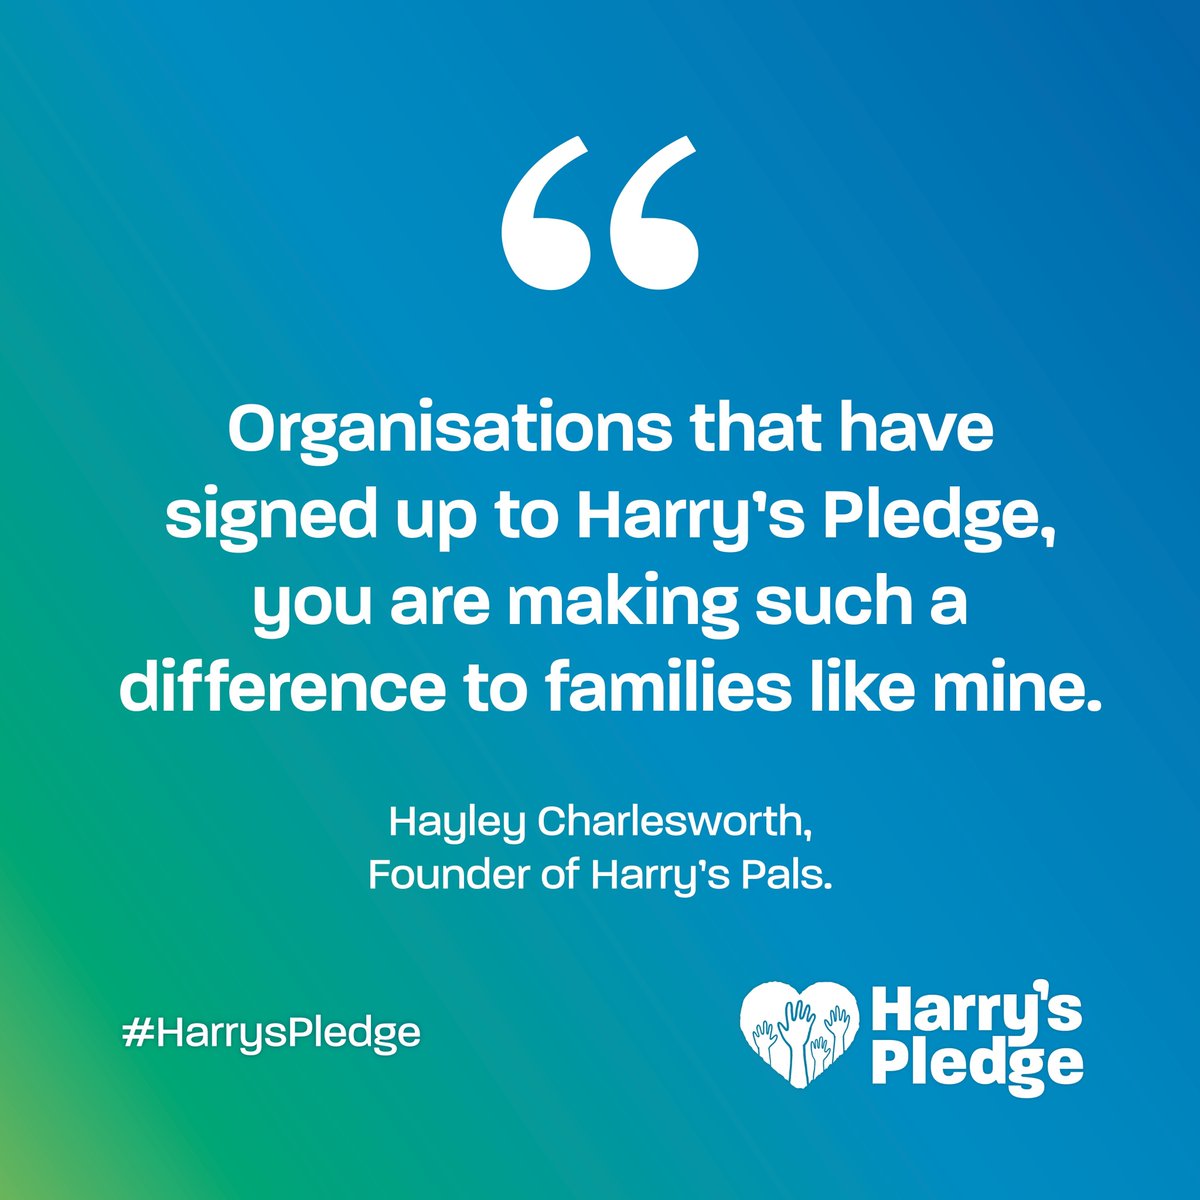 Harry’s Pledge makes a huge difference to carers and their families. We focus on four key areas: As employers In our workspaces In the homes we build Training and career progression To find out more and to sign up, click here: orlo.uk/dDumq